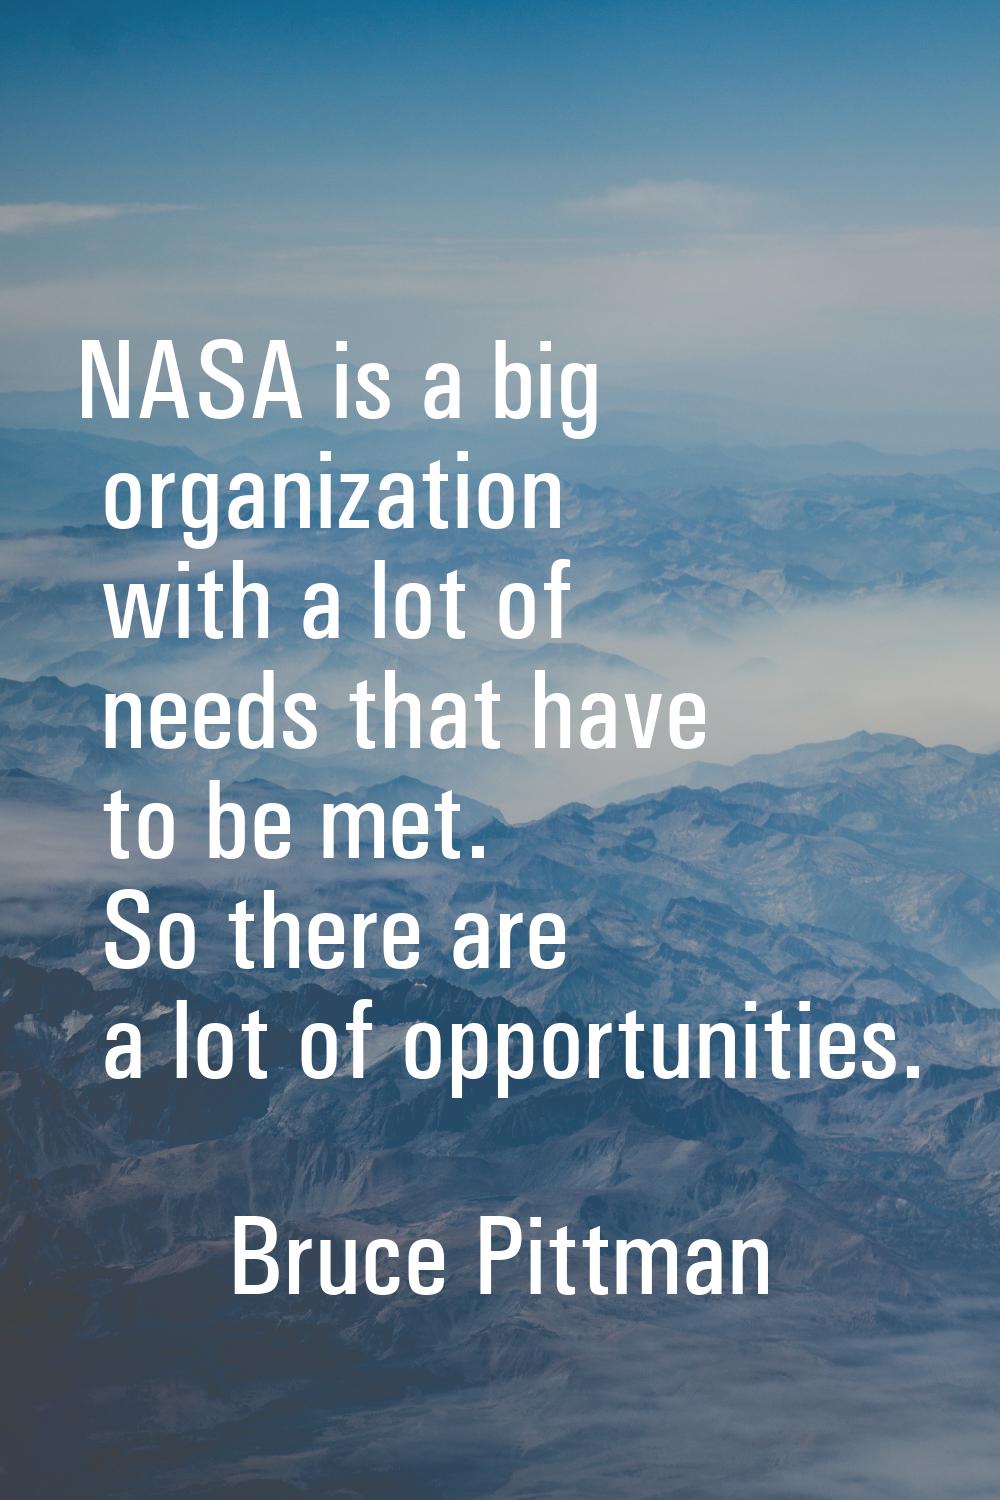 NASA is a big organization with a lot of needs that have to be met. So there are a lot of opportuni